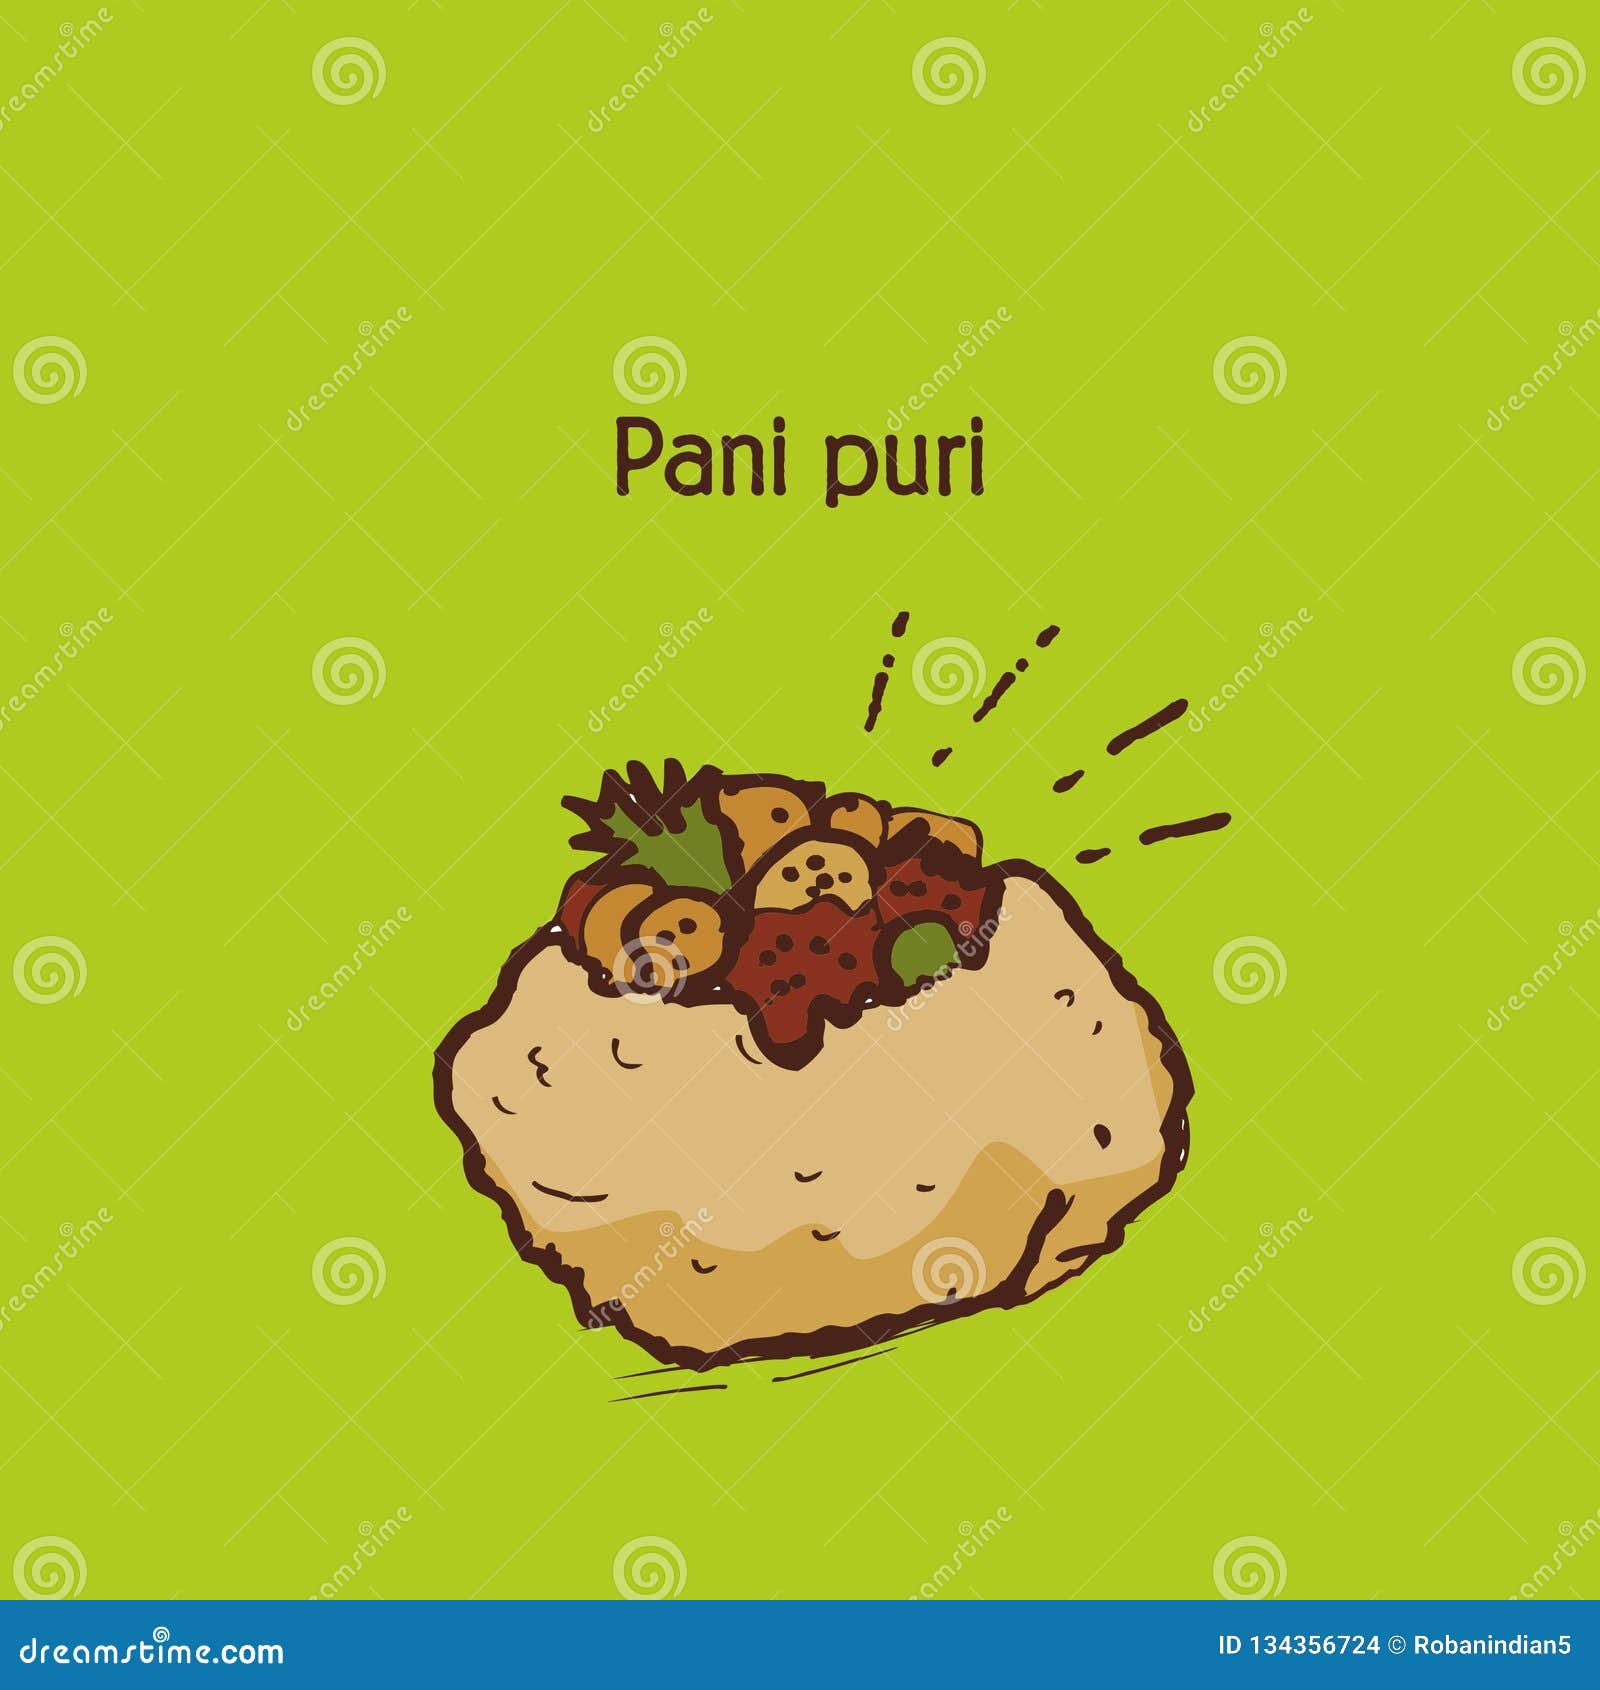 Indian Snacks Stock Illustrations – 113 Indian Snacks Stock Illustrations,  Vectors & Clipart - Dreamstime